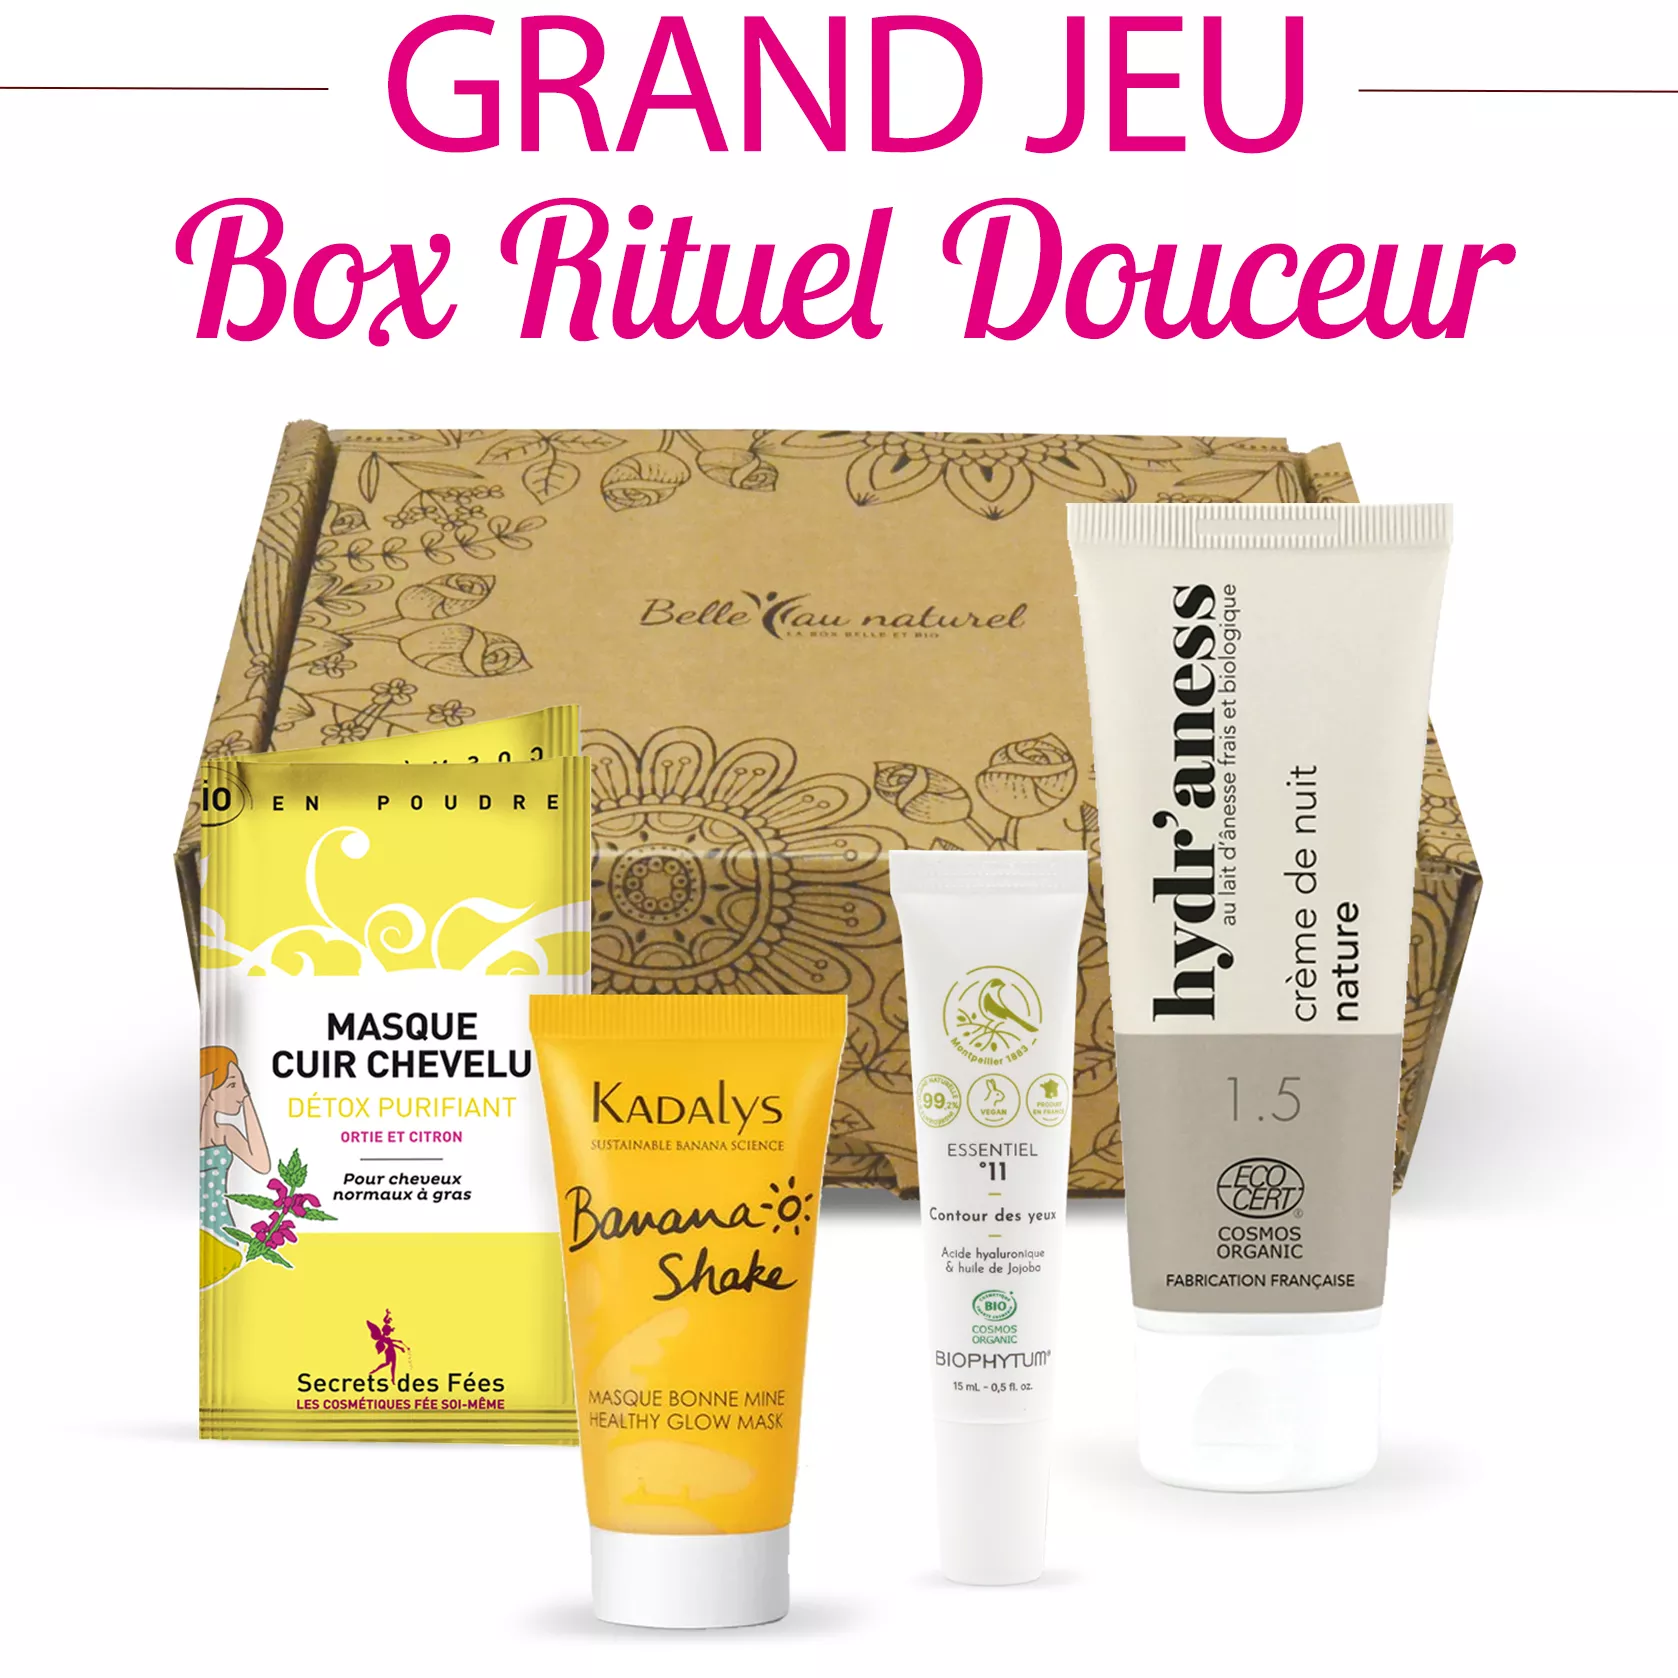 xGrand-jeu-Concours-0524.jpg.pagespeed.ic